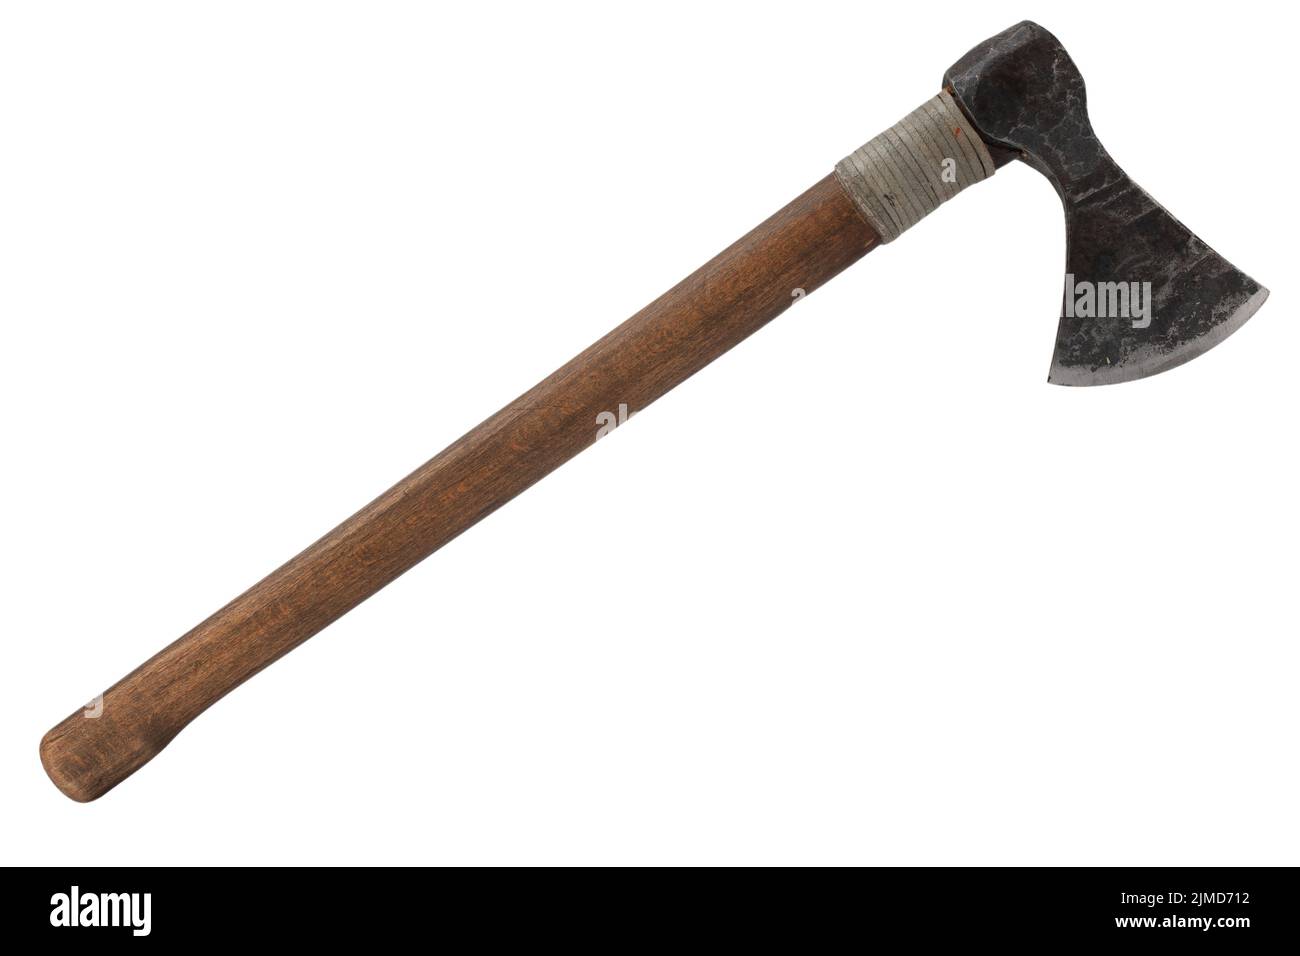 antique battle axe with wooden handle on white background Stock Photo